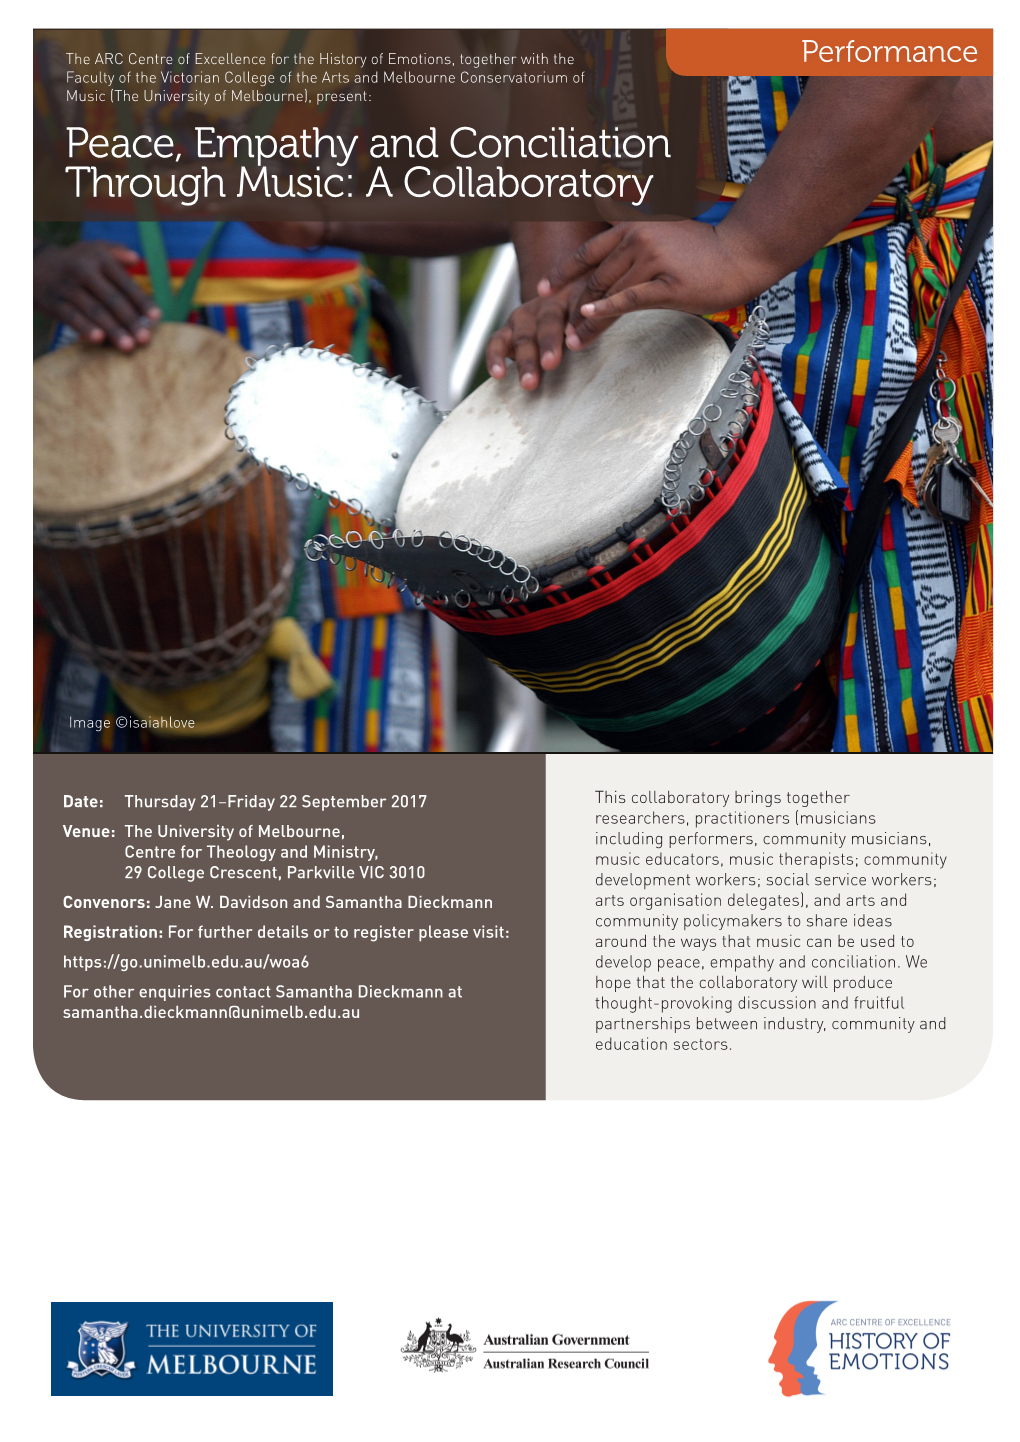 Peace, Empathy and Conciliation Through Music: a Collaboratory